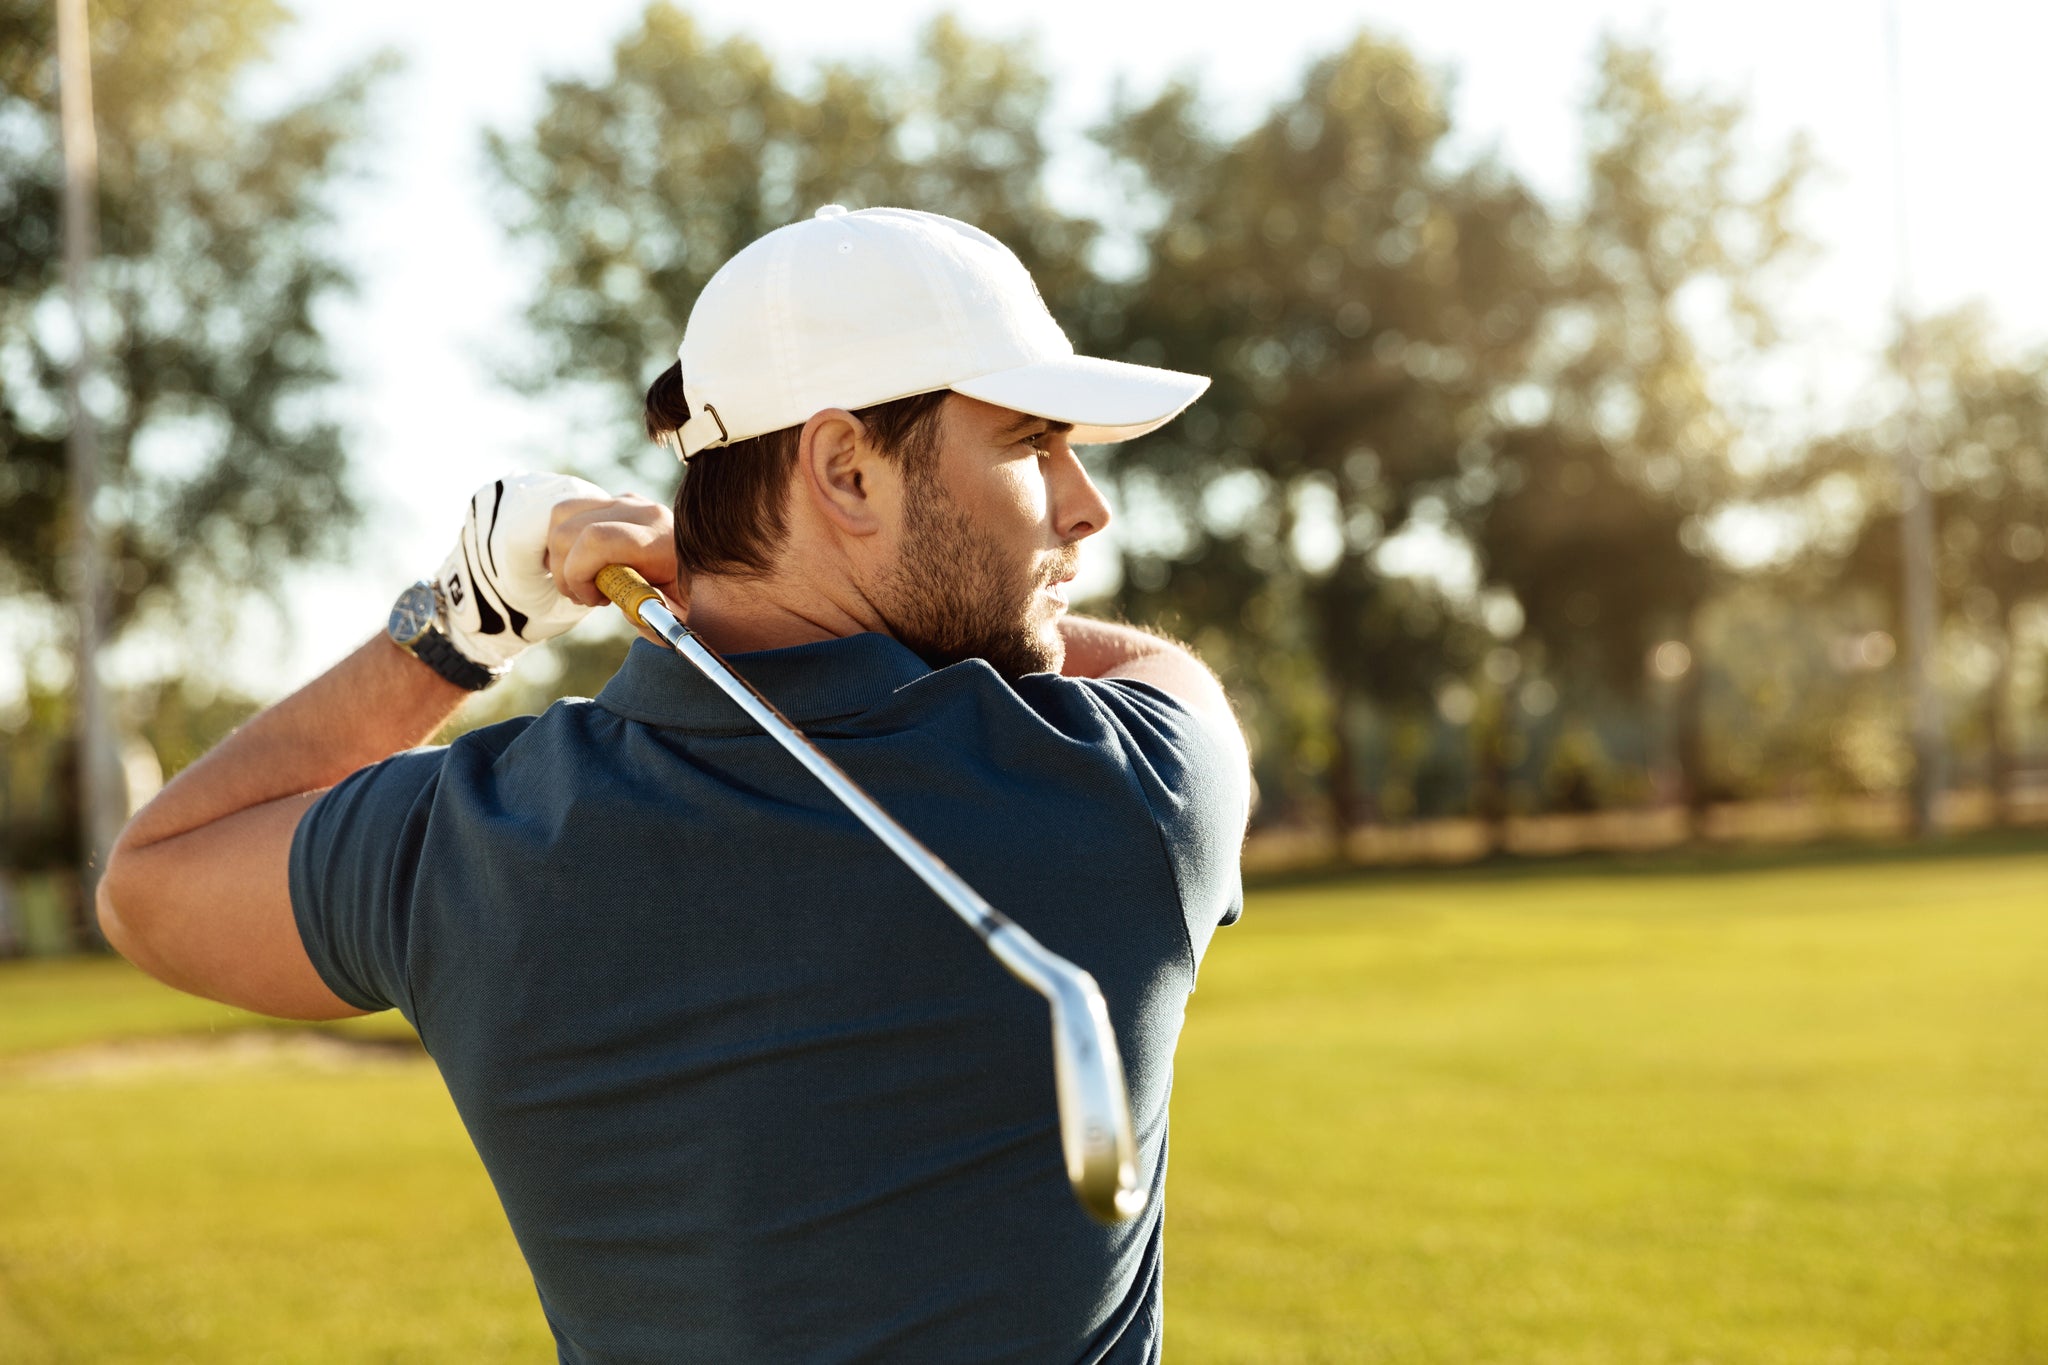 Practical Q&A for Beginners on Golf Course